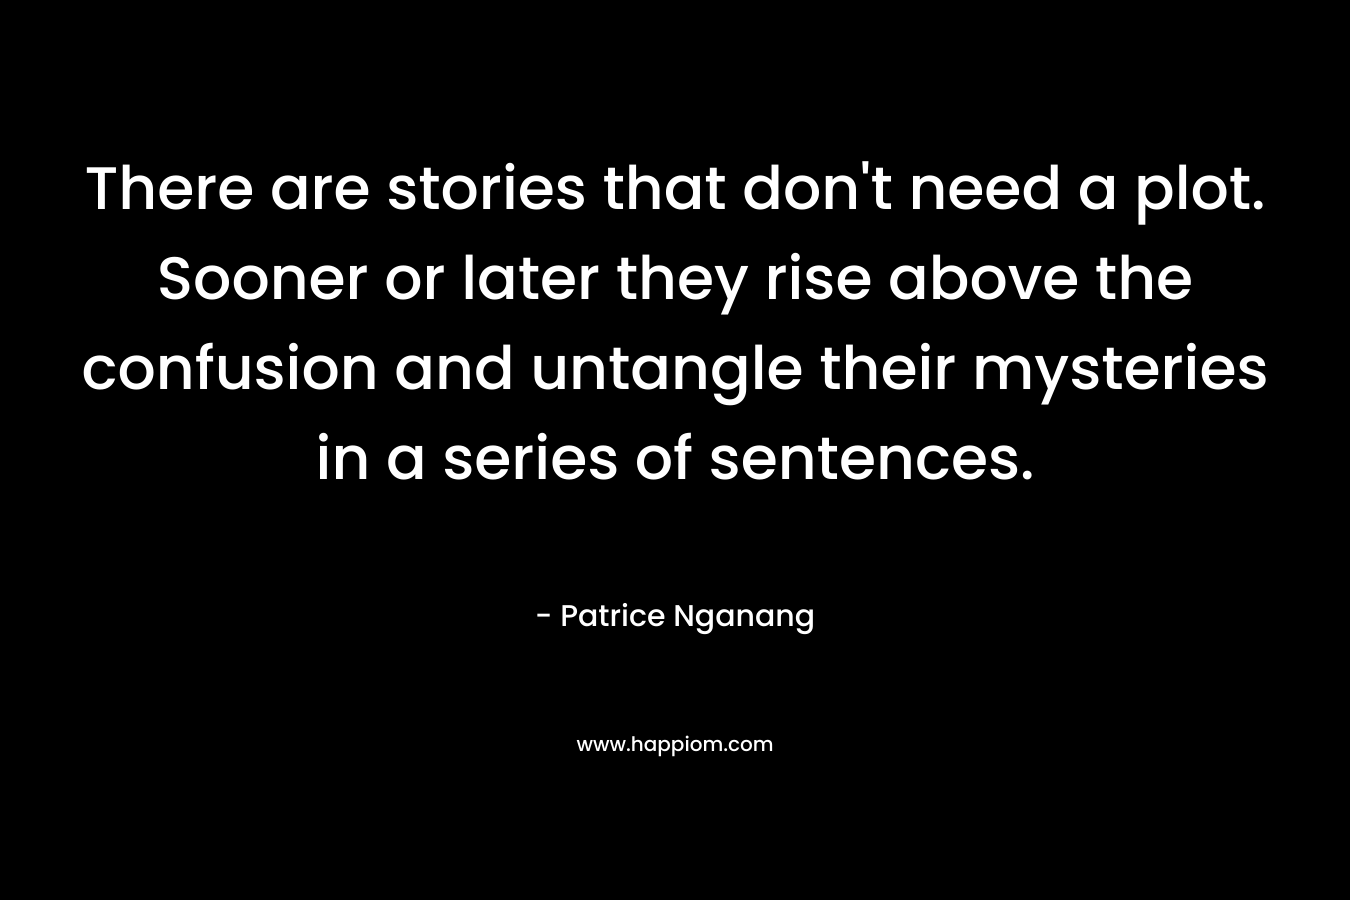 There are stories that don't need a plot. Sooner or later they rise above the confusion and untangle their mysteries in a series of sentences.